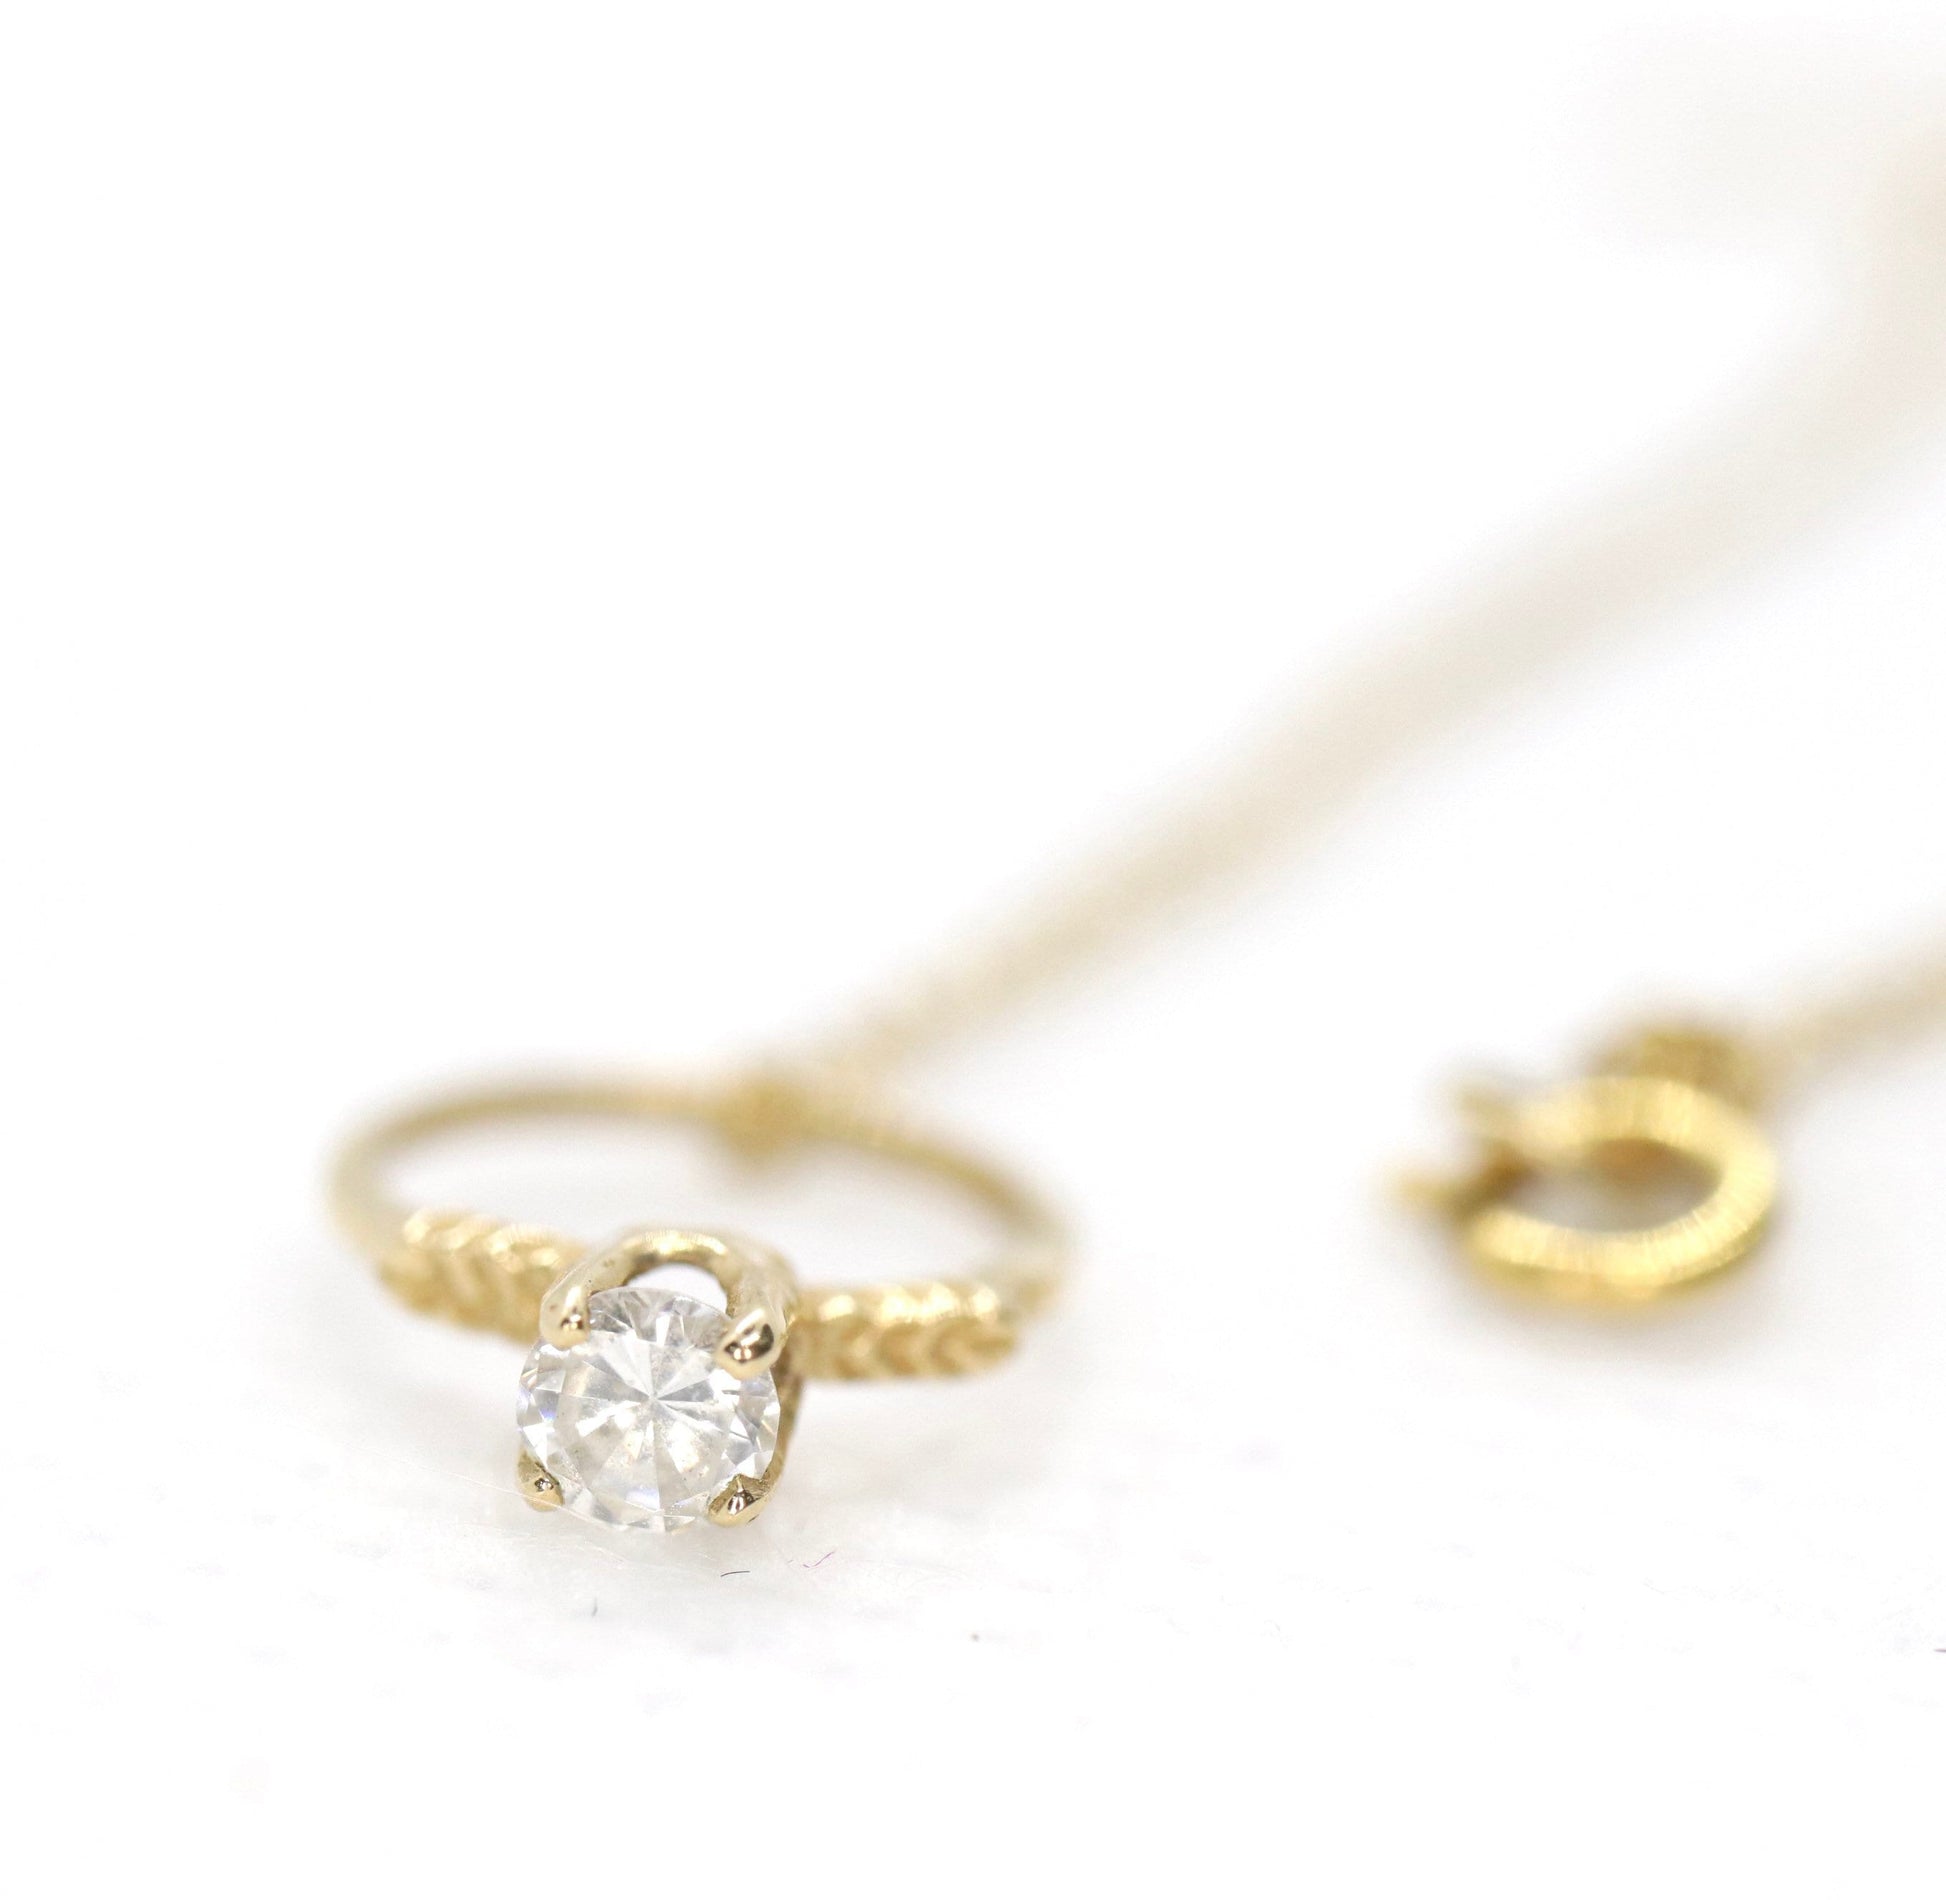 14k Engagement Ring Charm Necklace. Tiny engagement ring CZ Pendant. 18in Rolo Necklace